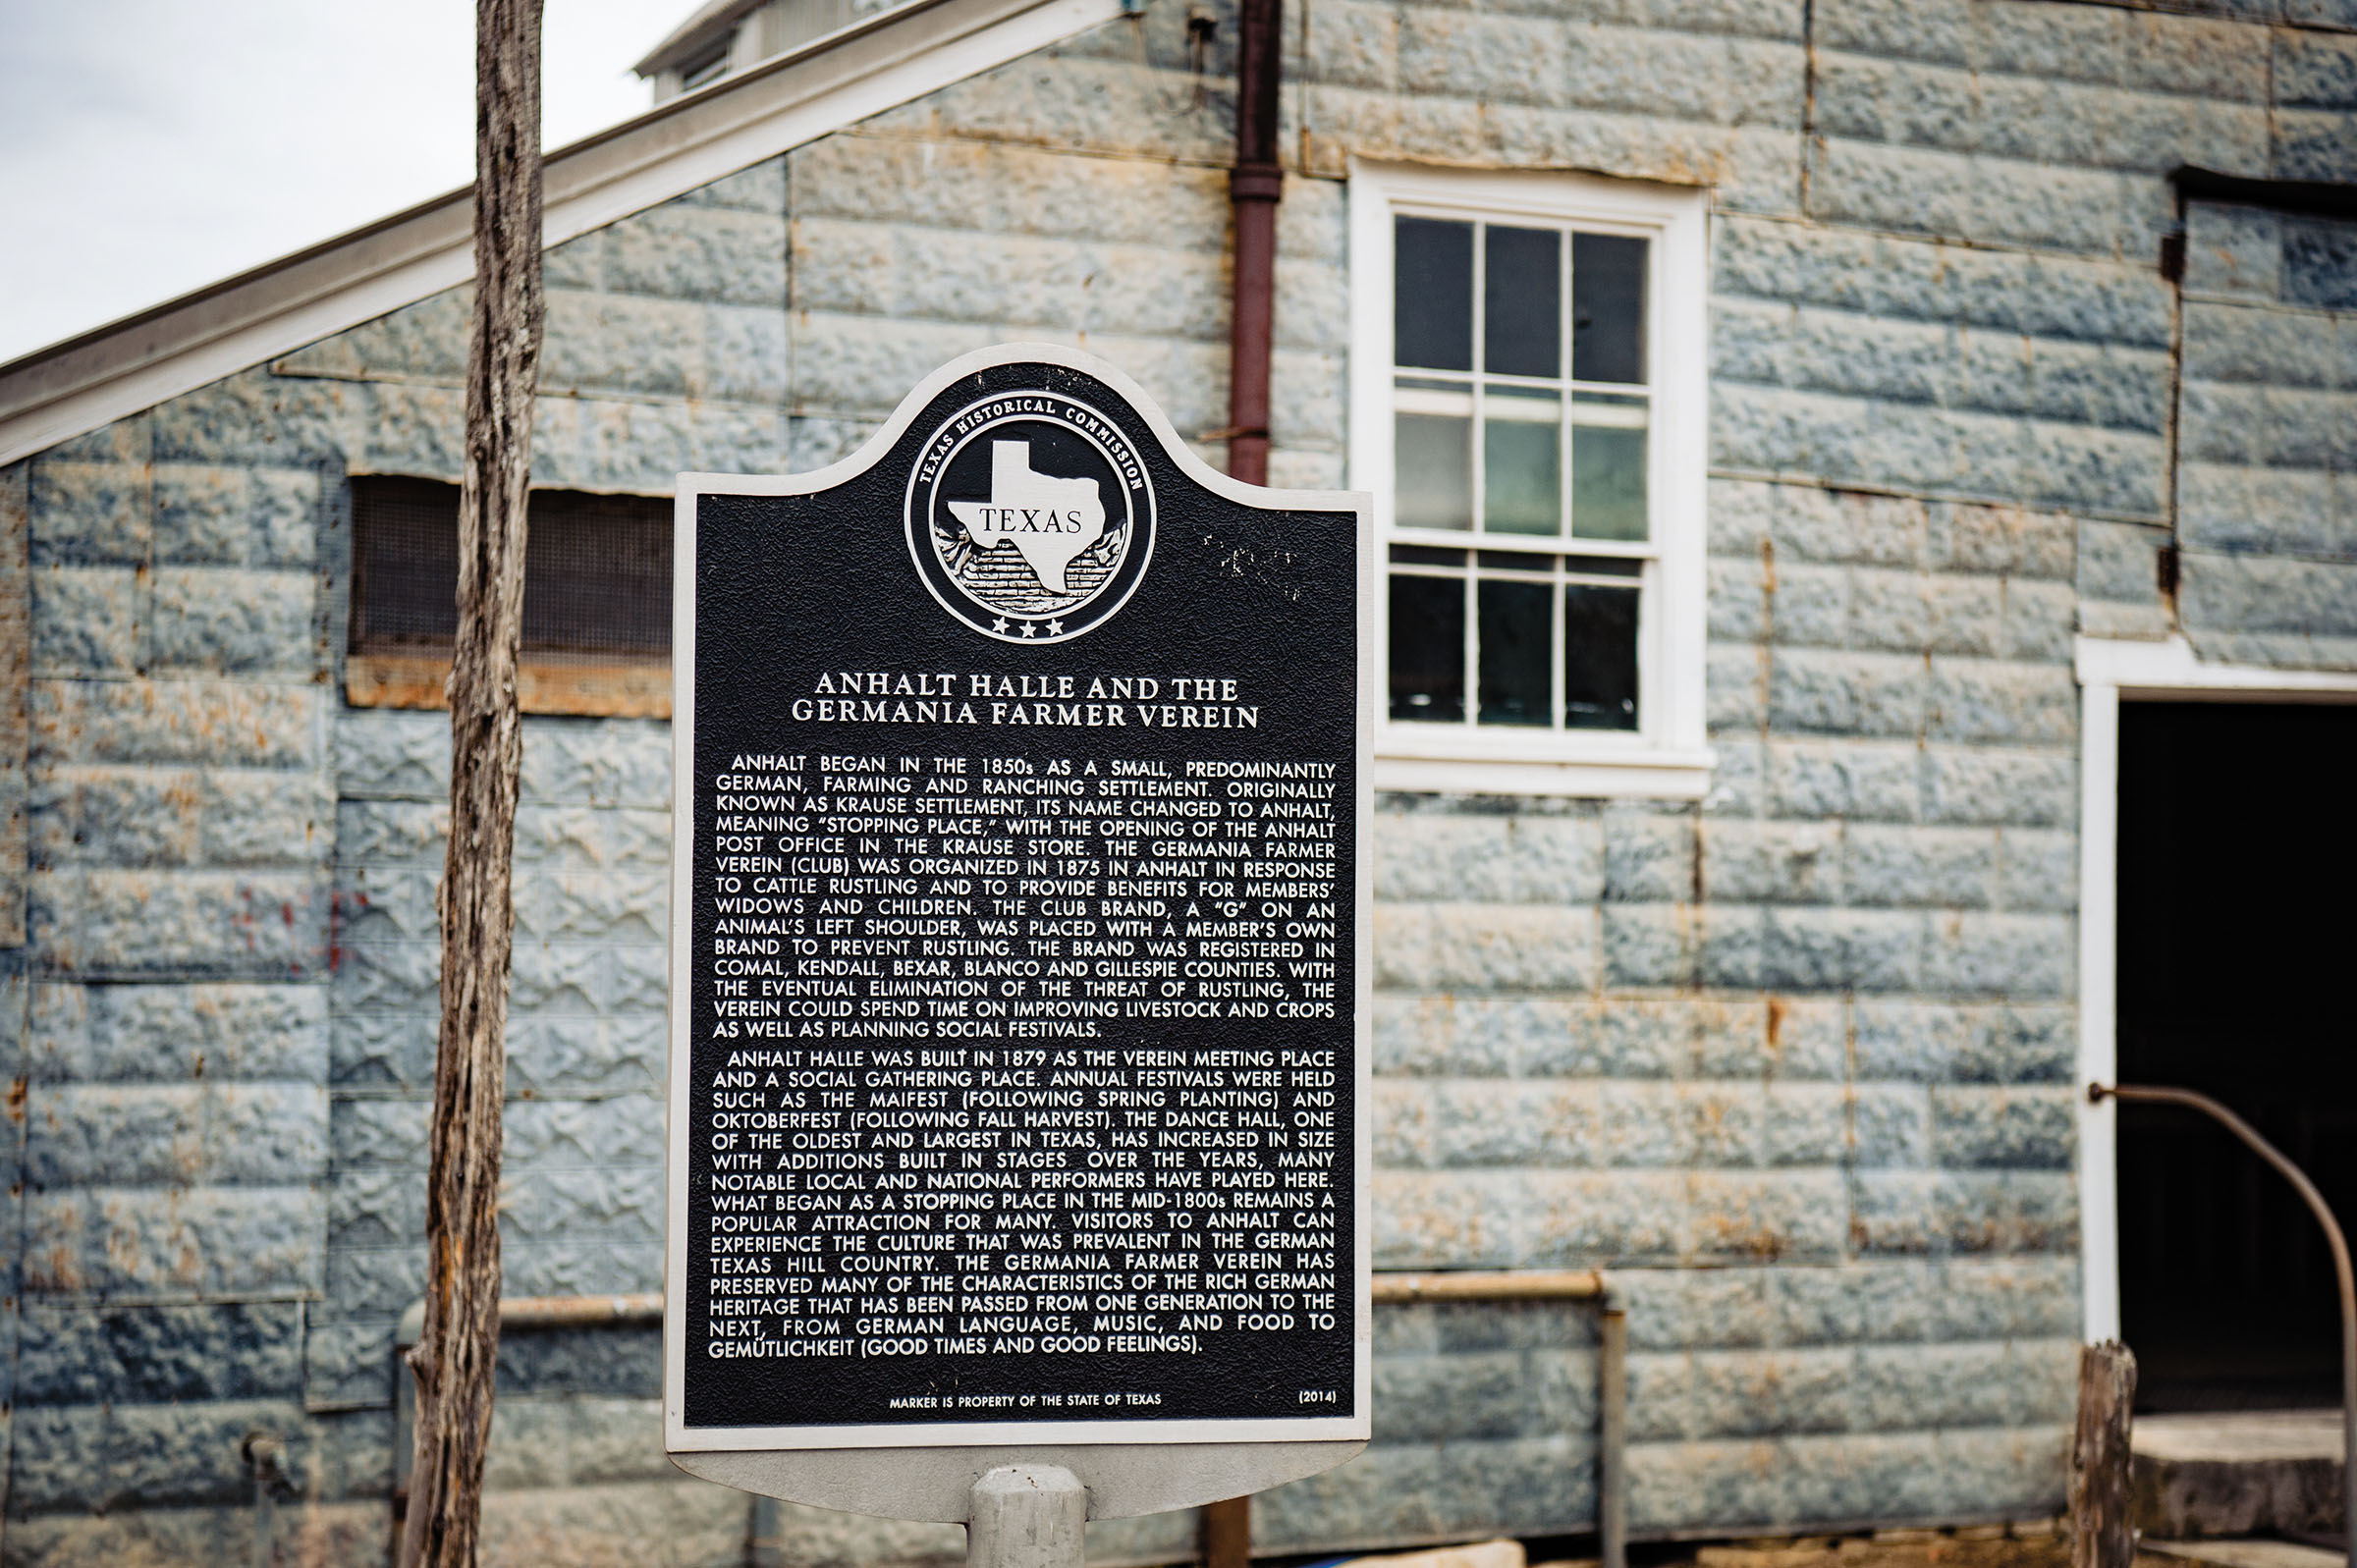 A Texas Historical Marker in front of a stone building